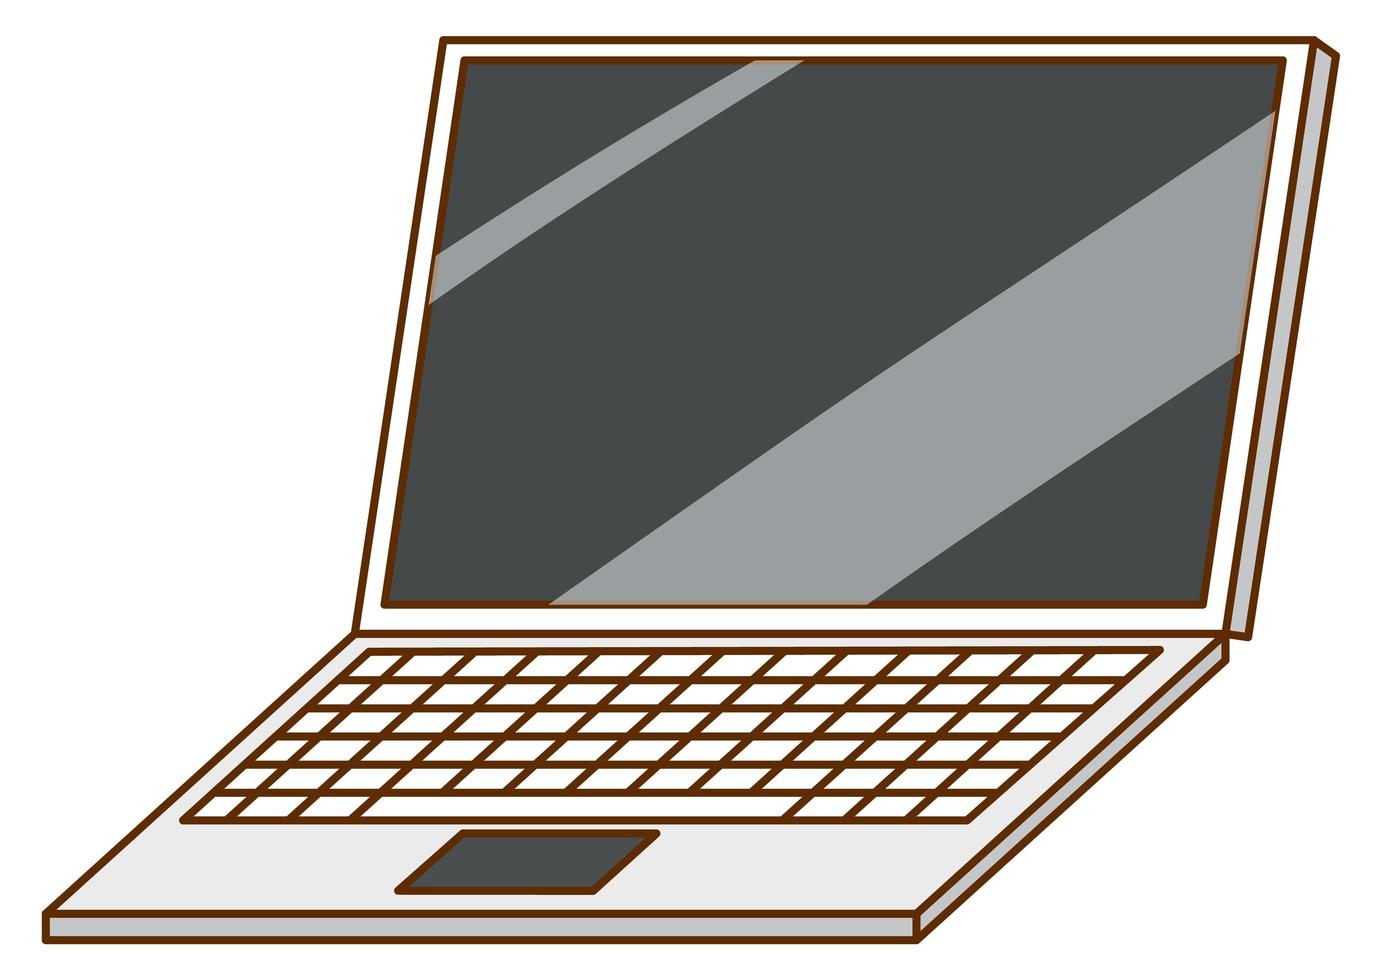 Computer laptop on white background vector